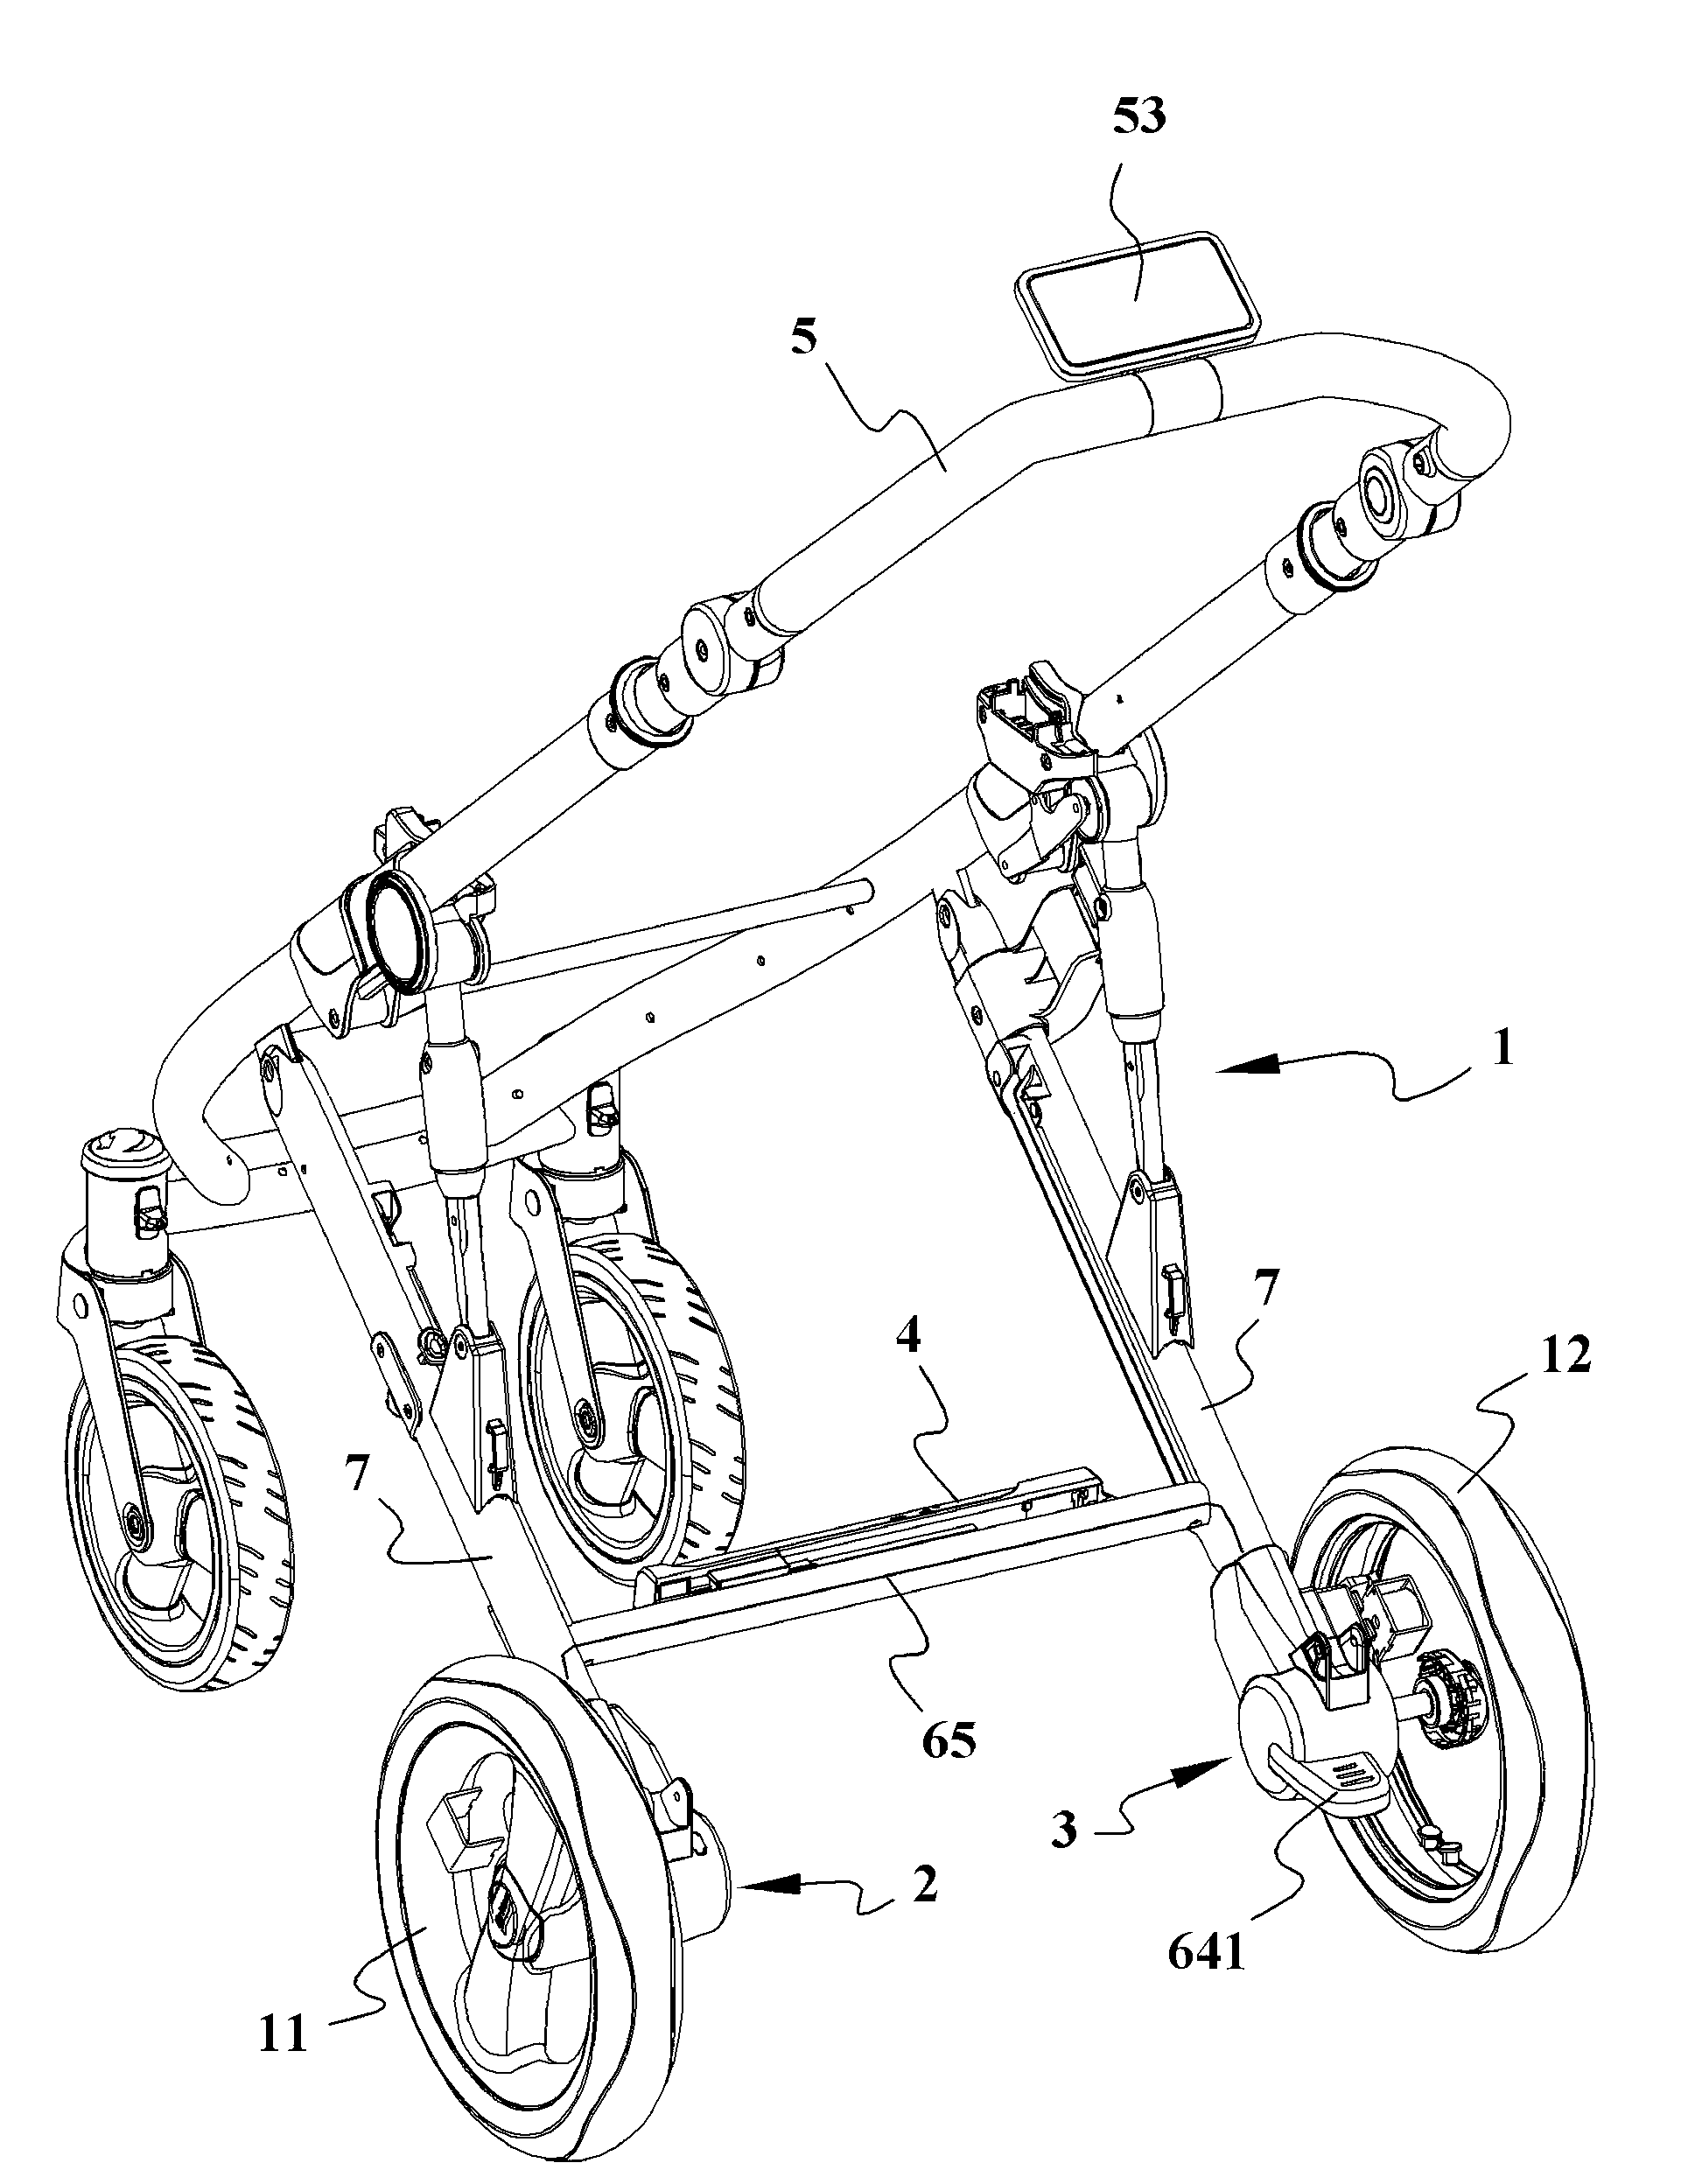 Stroller frame with function of automatically locking and releasing rear wheels by body sensing